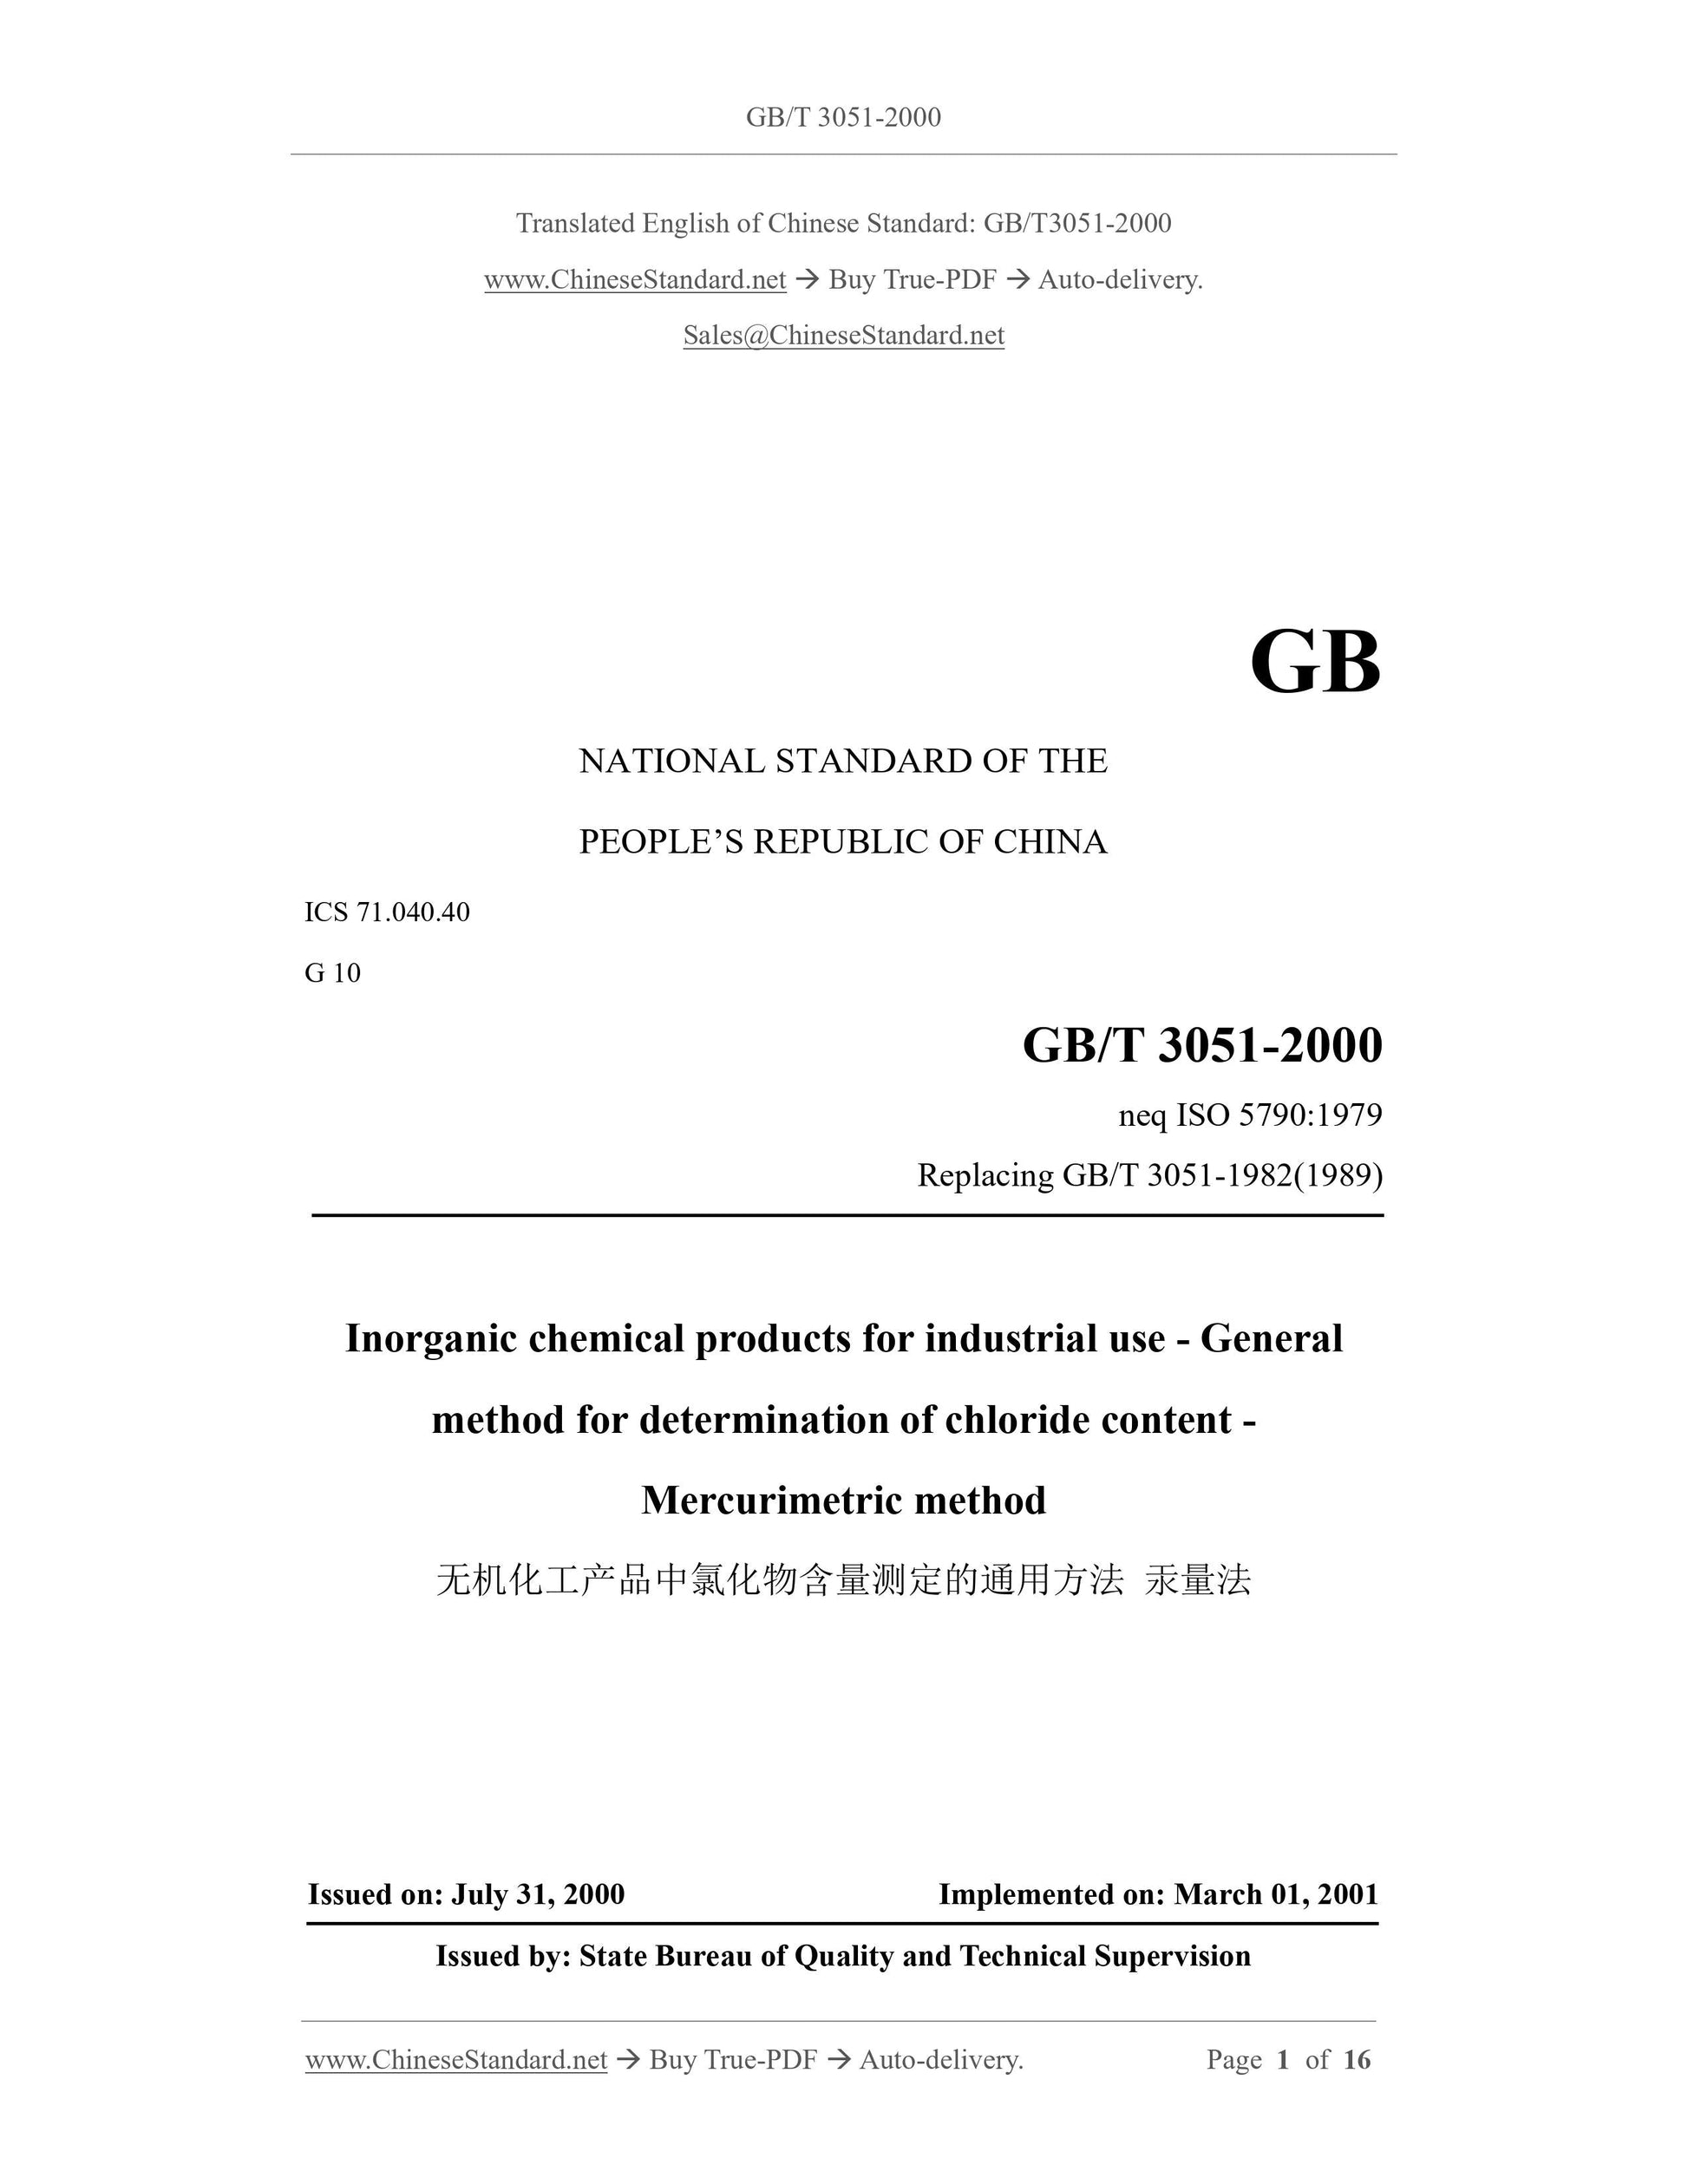 GB/T 3051-2000 Page 1